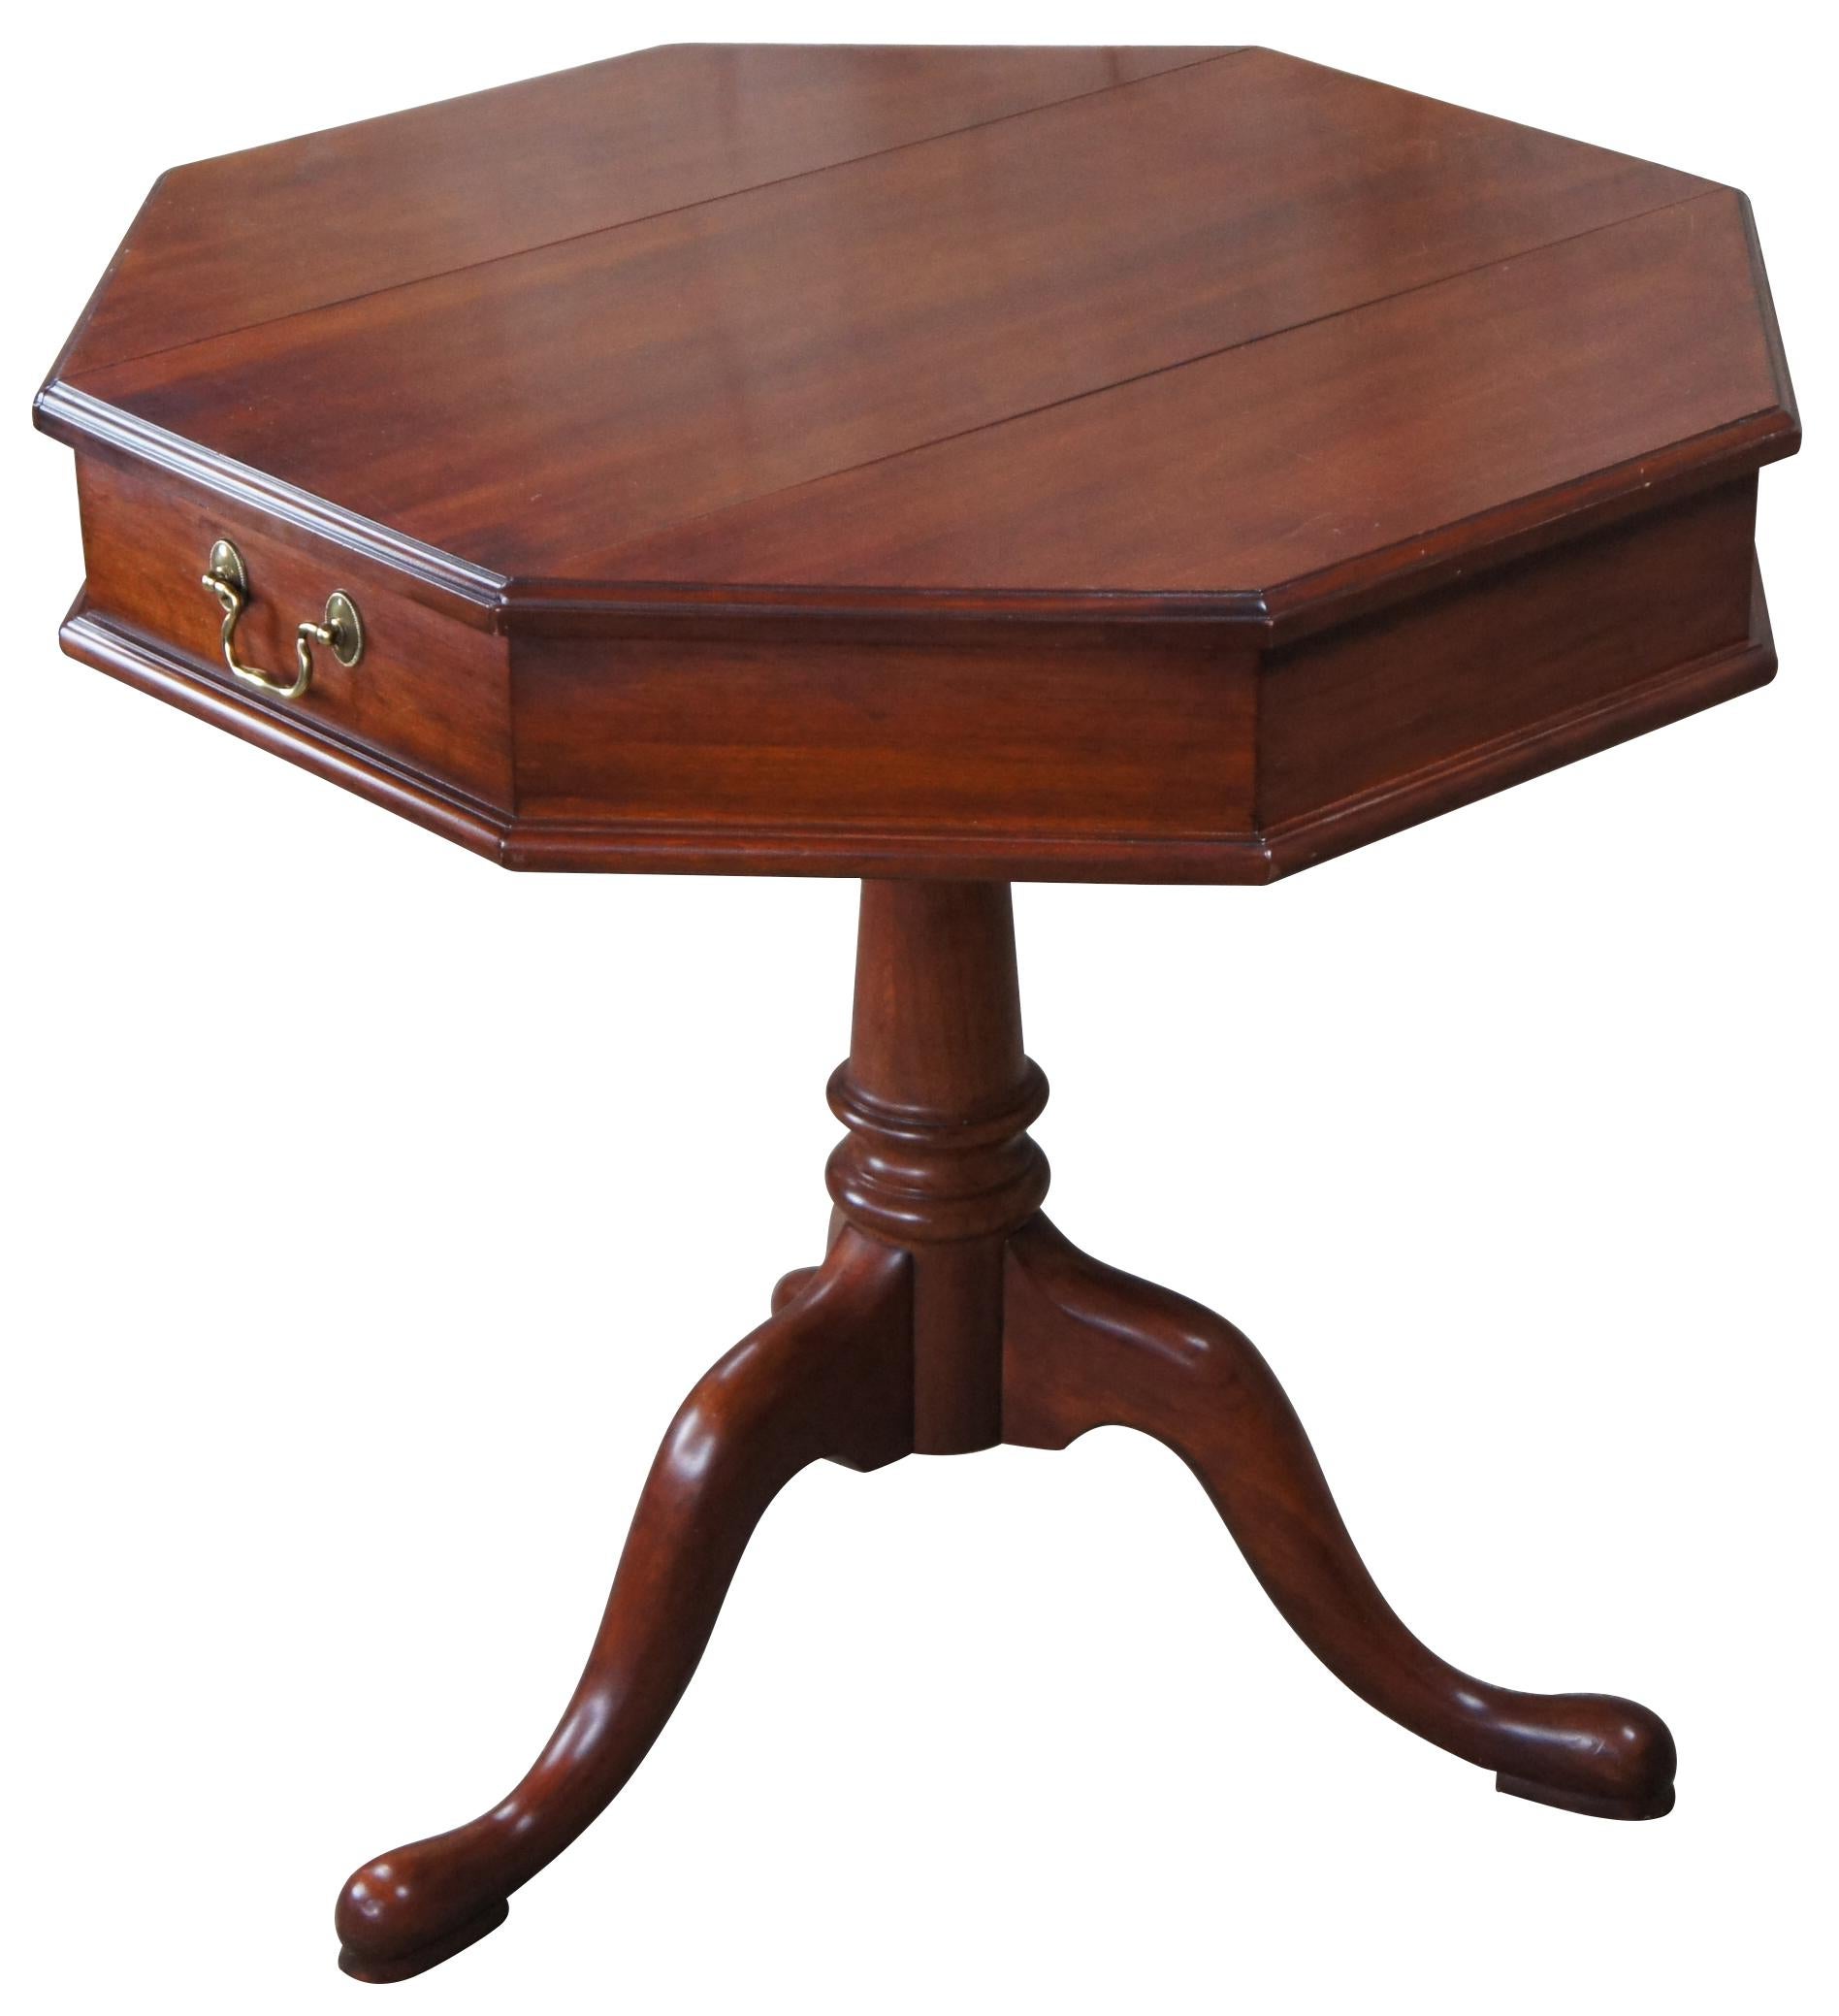 Vintage Henkel Harris Jefferson Queen Anne pedestal side, accent or center table. Made of Wild Black Cherry featuring octagonal form with two incognito flip top storage compartments and tripod base with pad feet. 

The Henkel-Harris legacy started